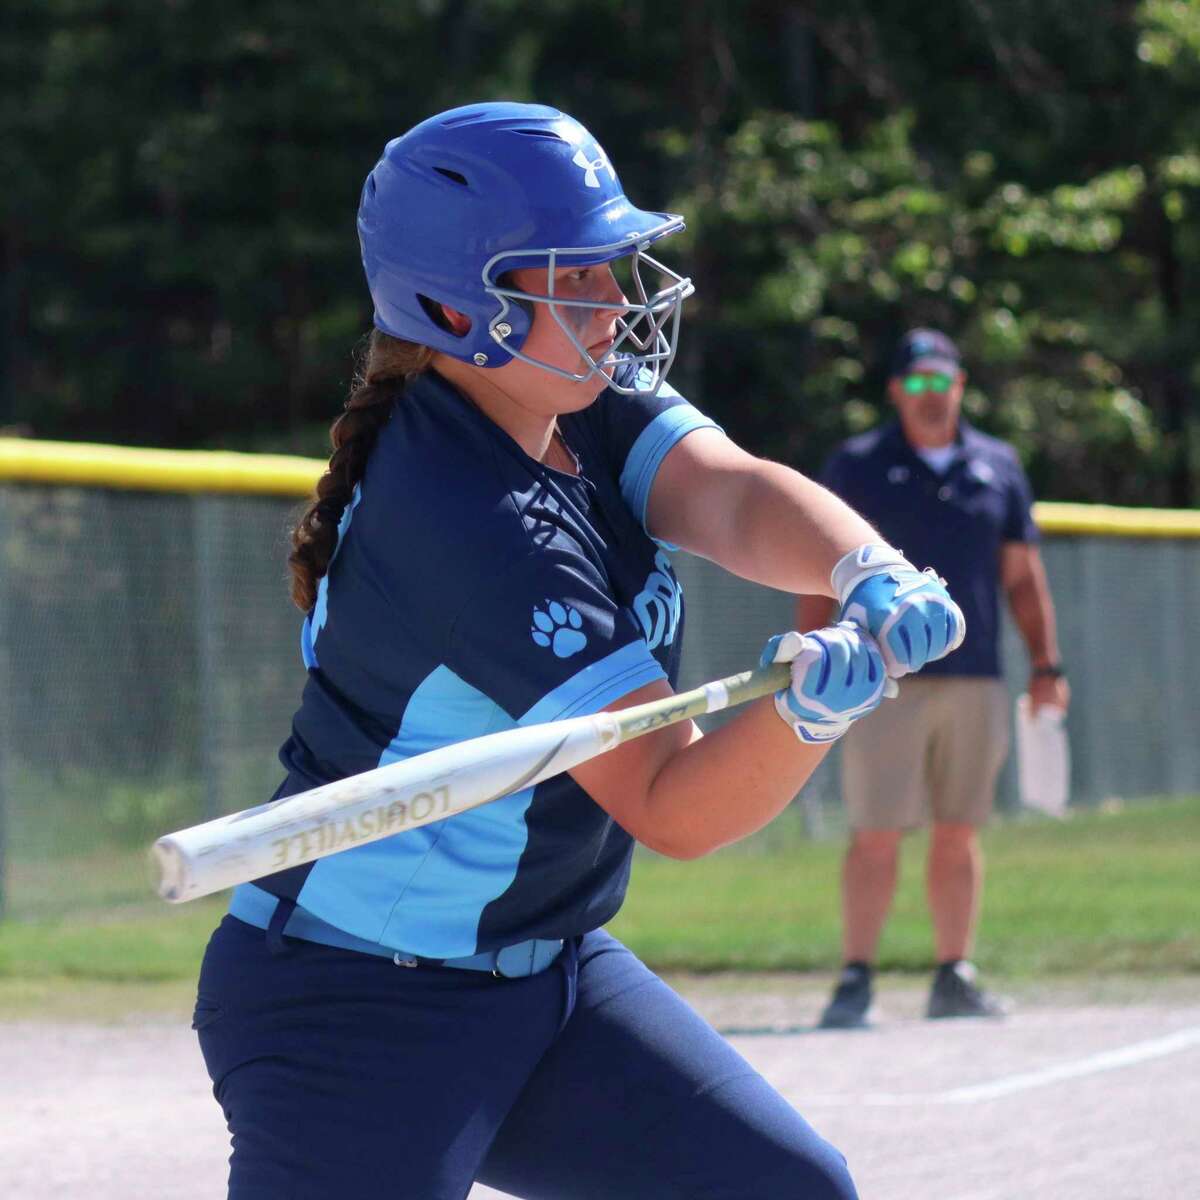 Maddy Biller swings at a pitch during districts last spring. (File photo)